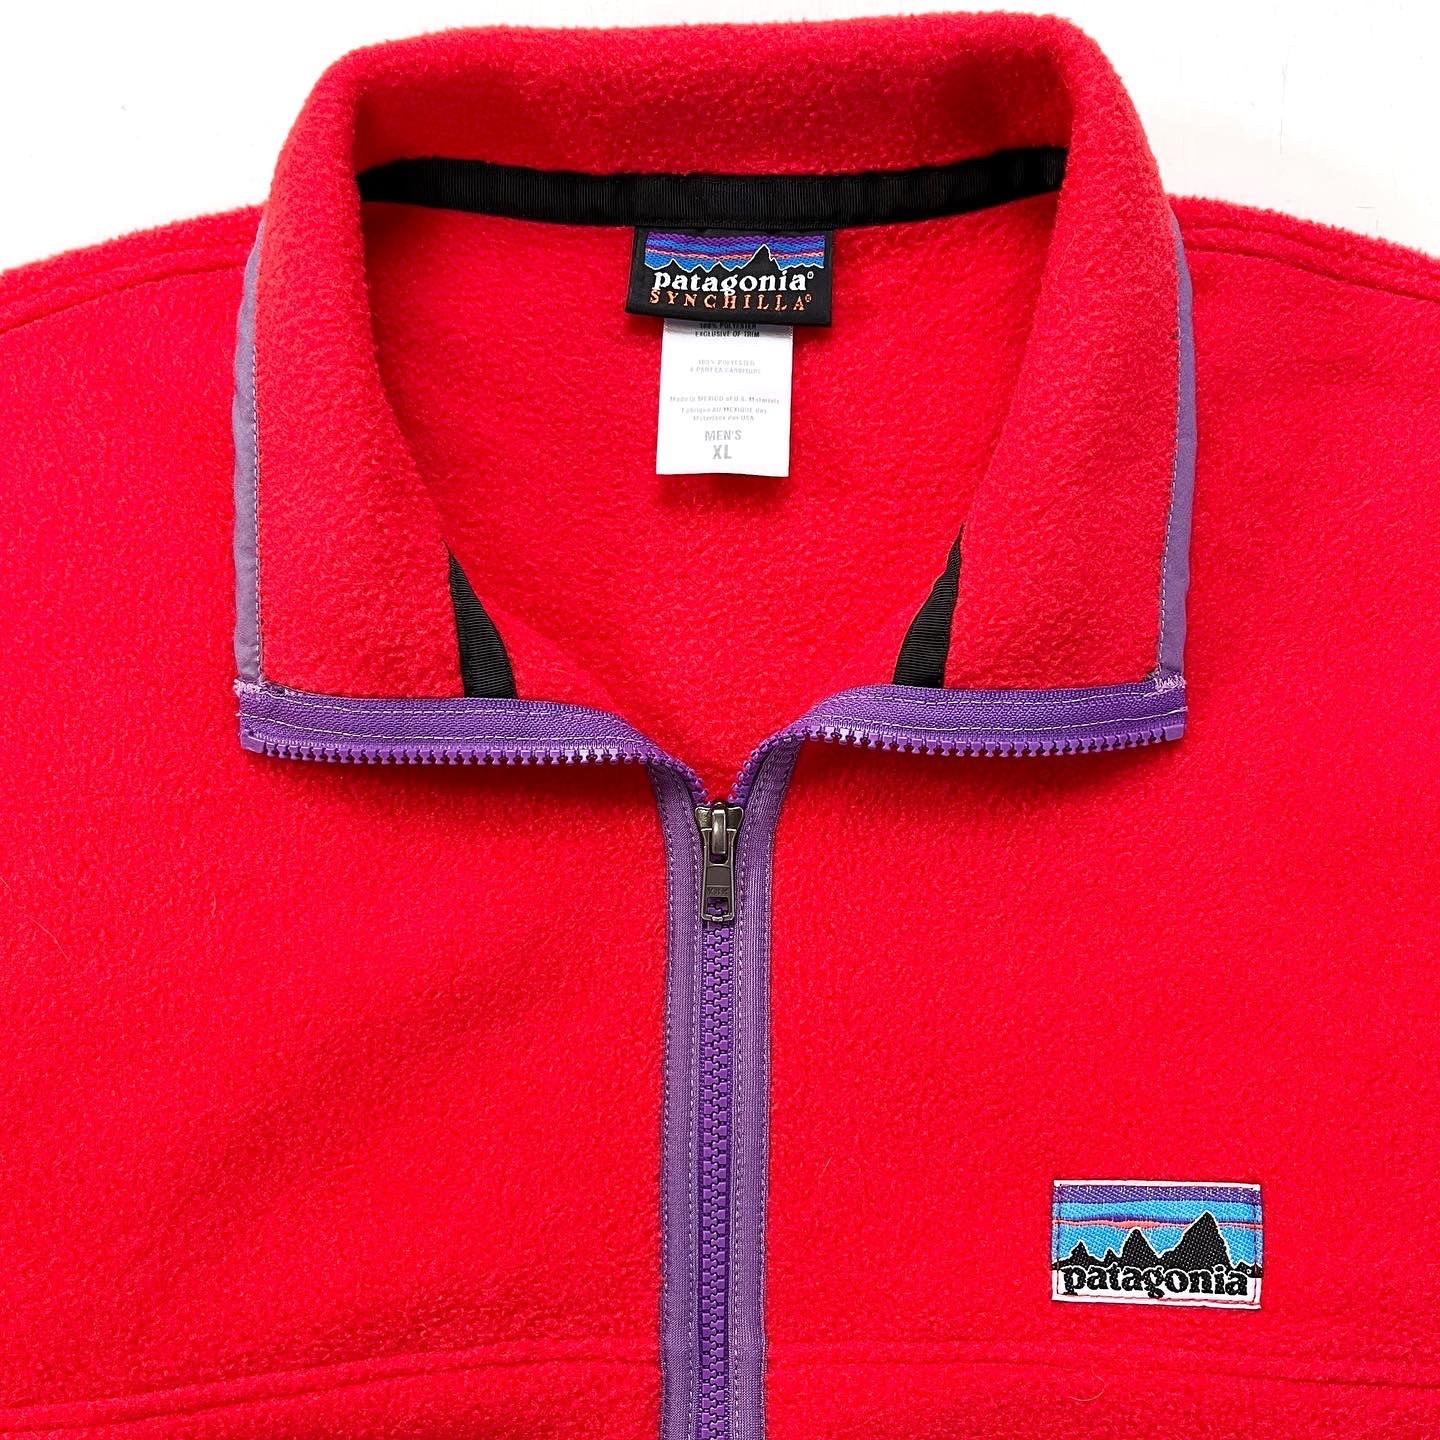 2008 Patagonia X Urban Outfitters Synchilla Cardigan, Bright Red (XL)